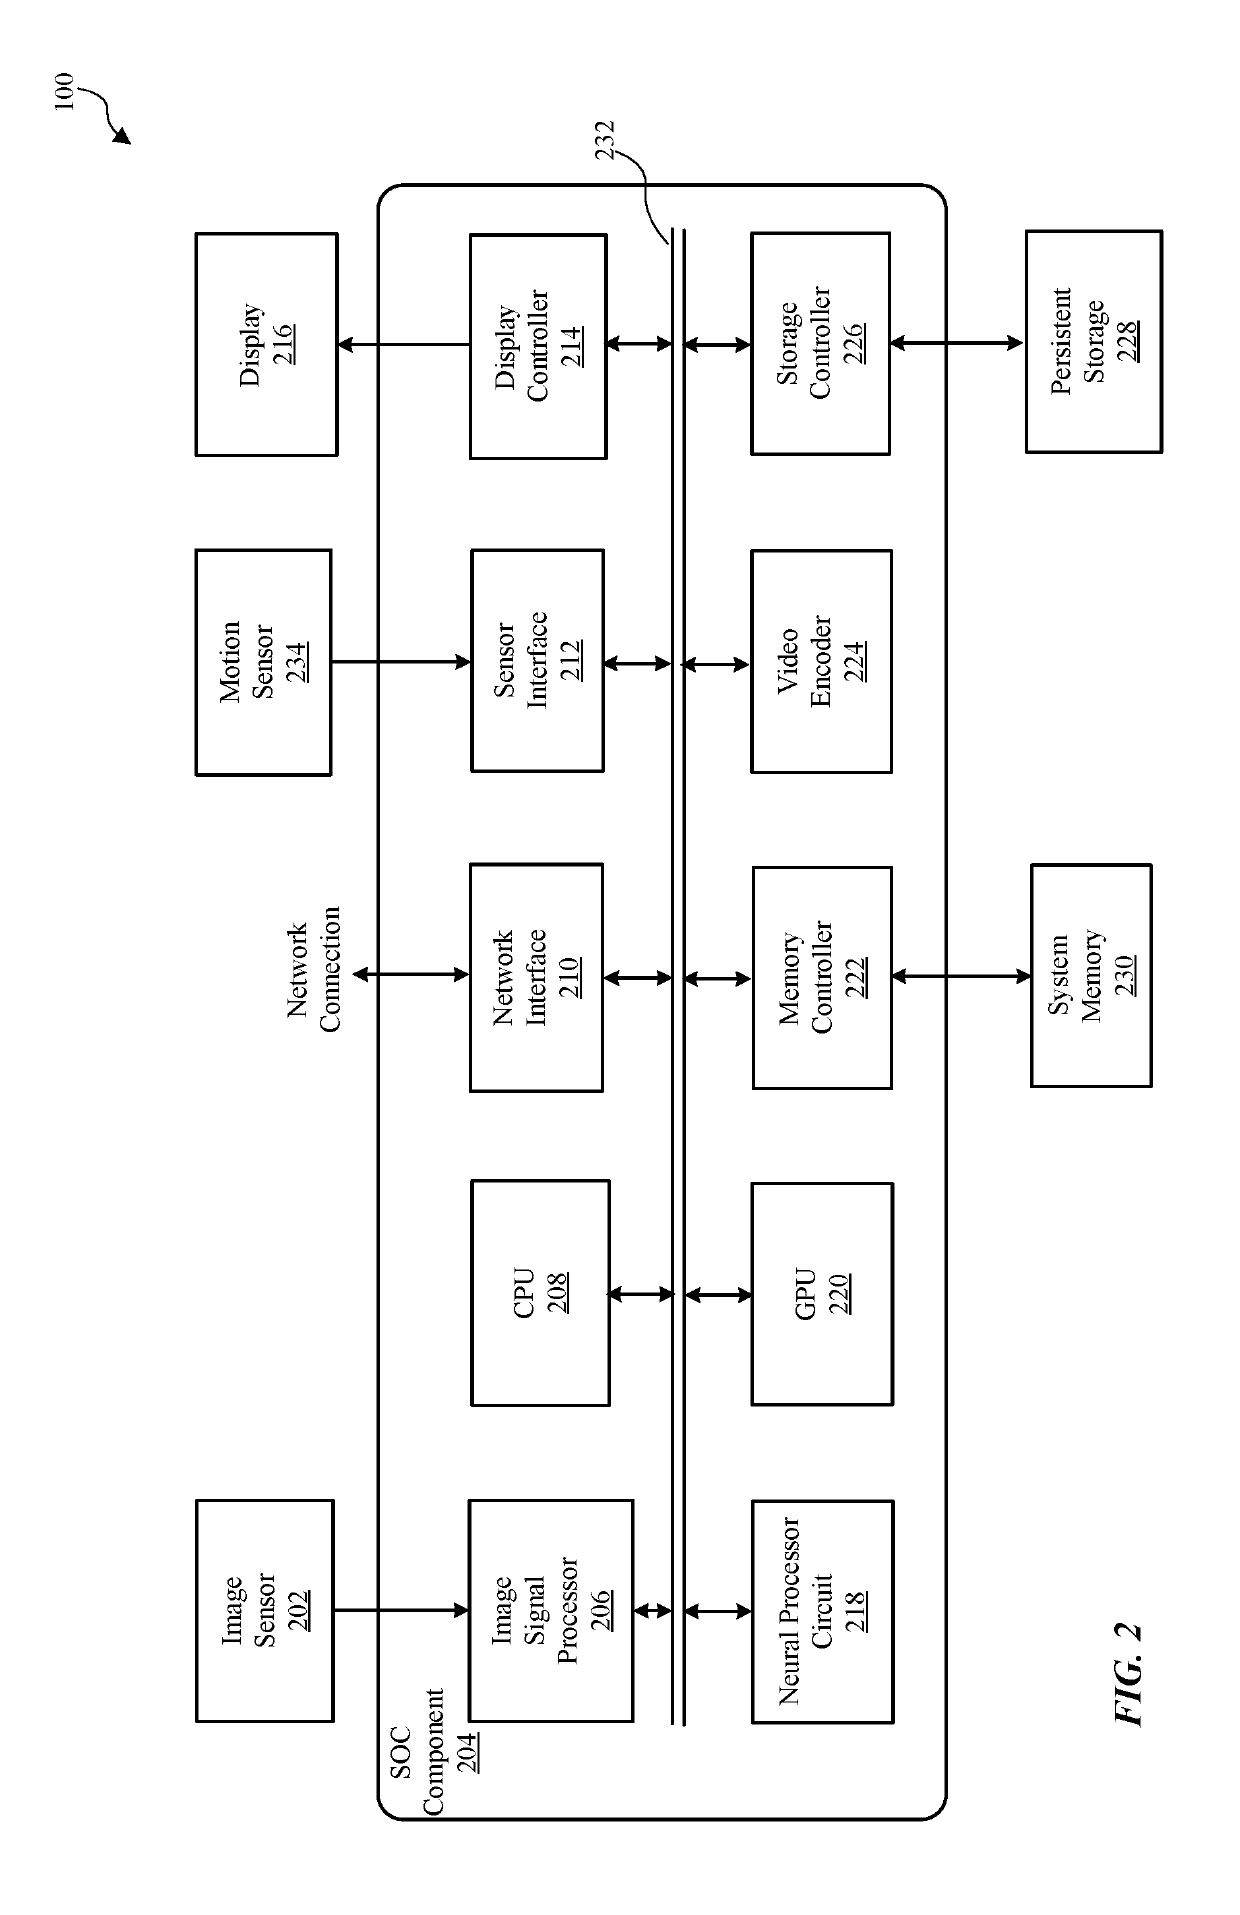 Splitting of input data for processing in neural network processor